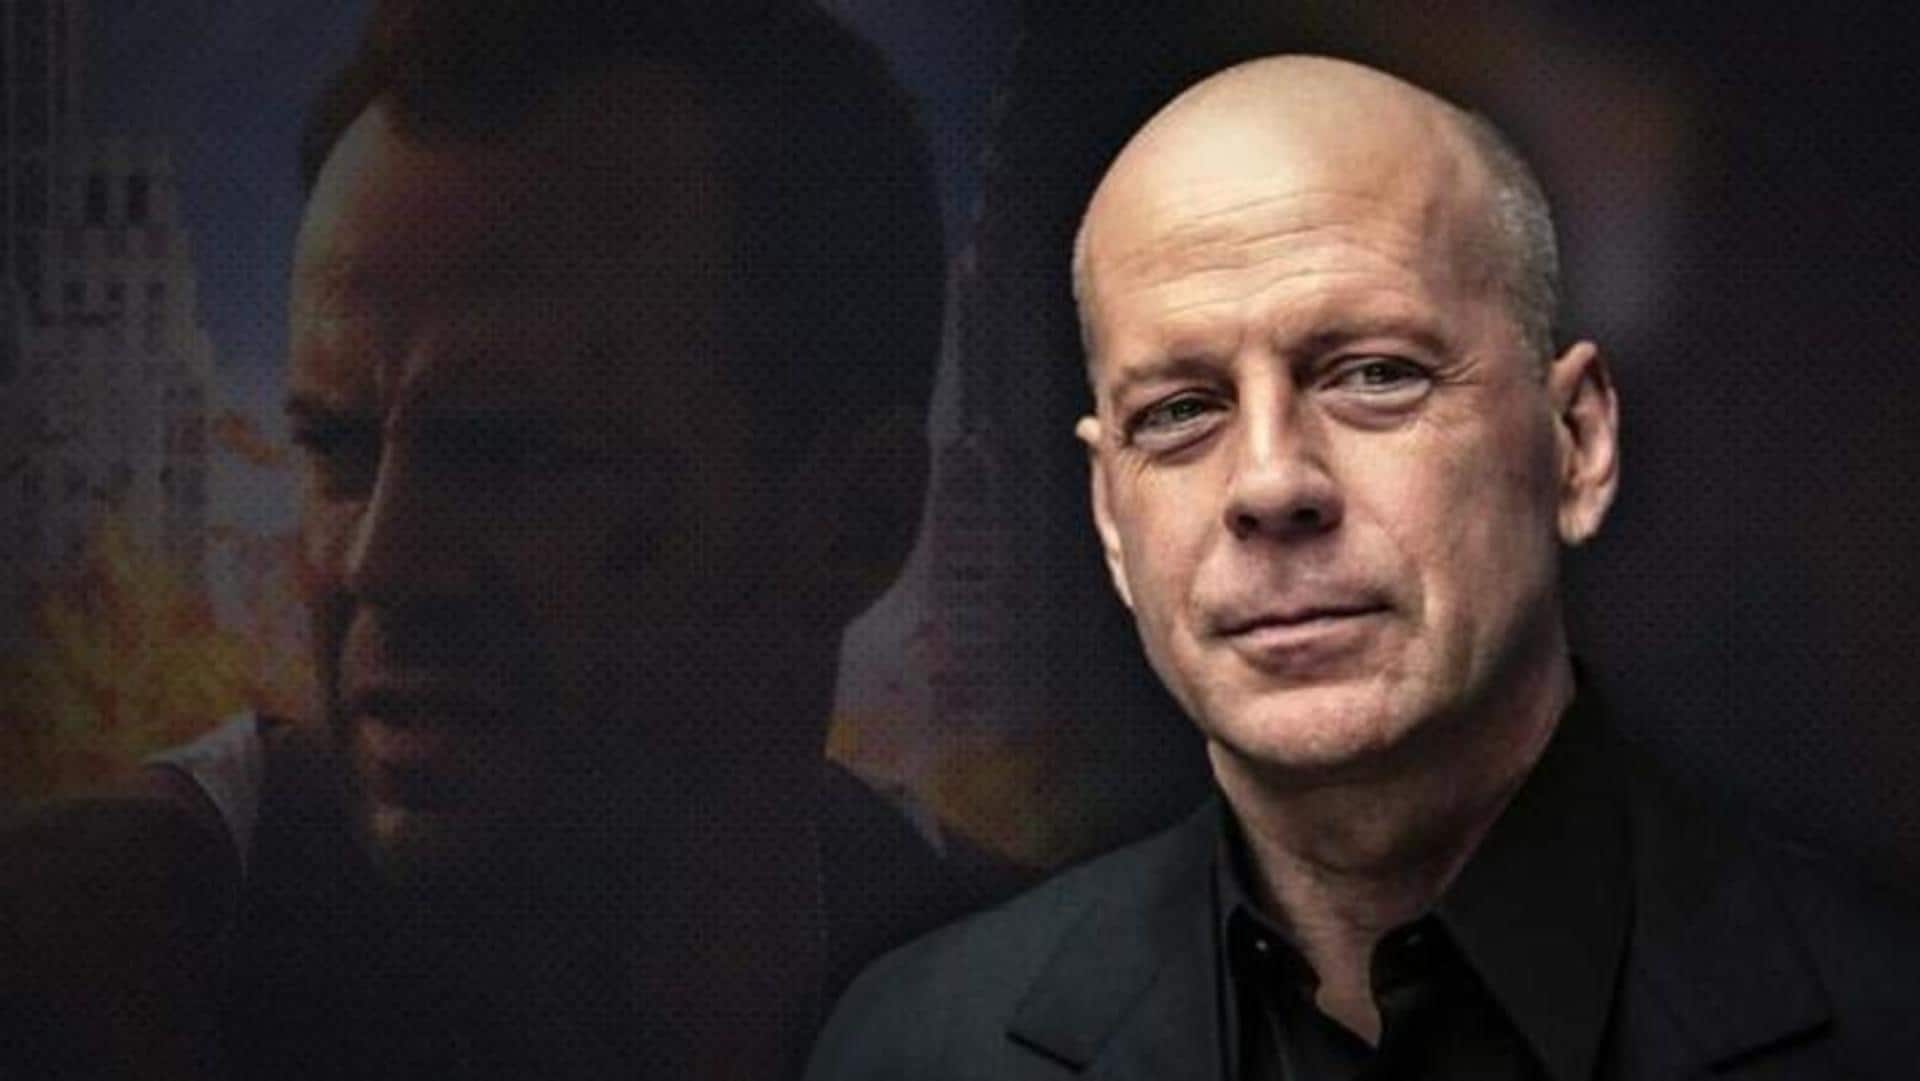 'Die Hard' star Bruce Willis diagnosed with untreatable frontotemporal dementia